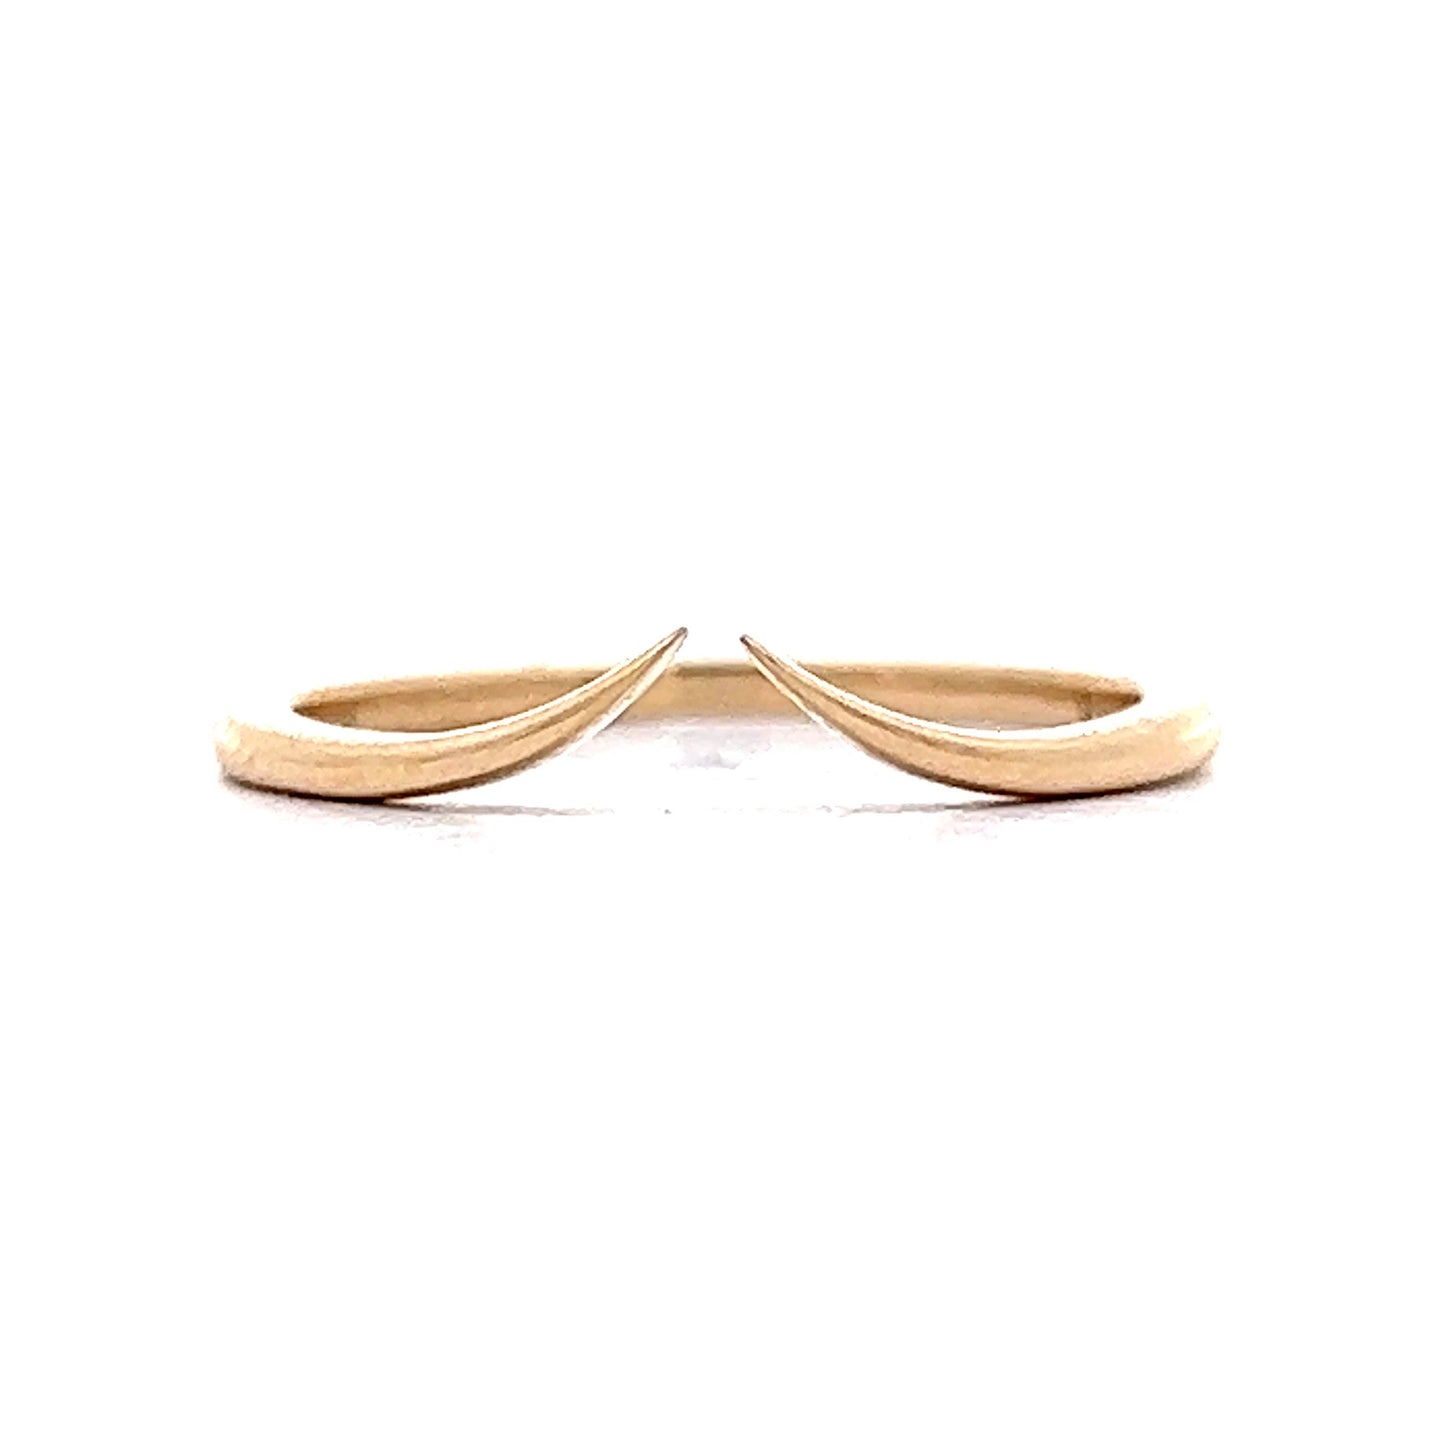 Open Contour Wedding Band in 14k Yellow Gold